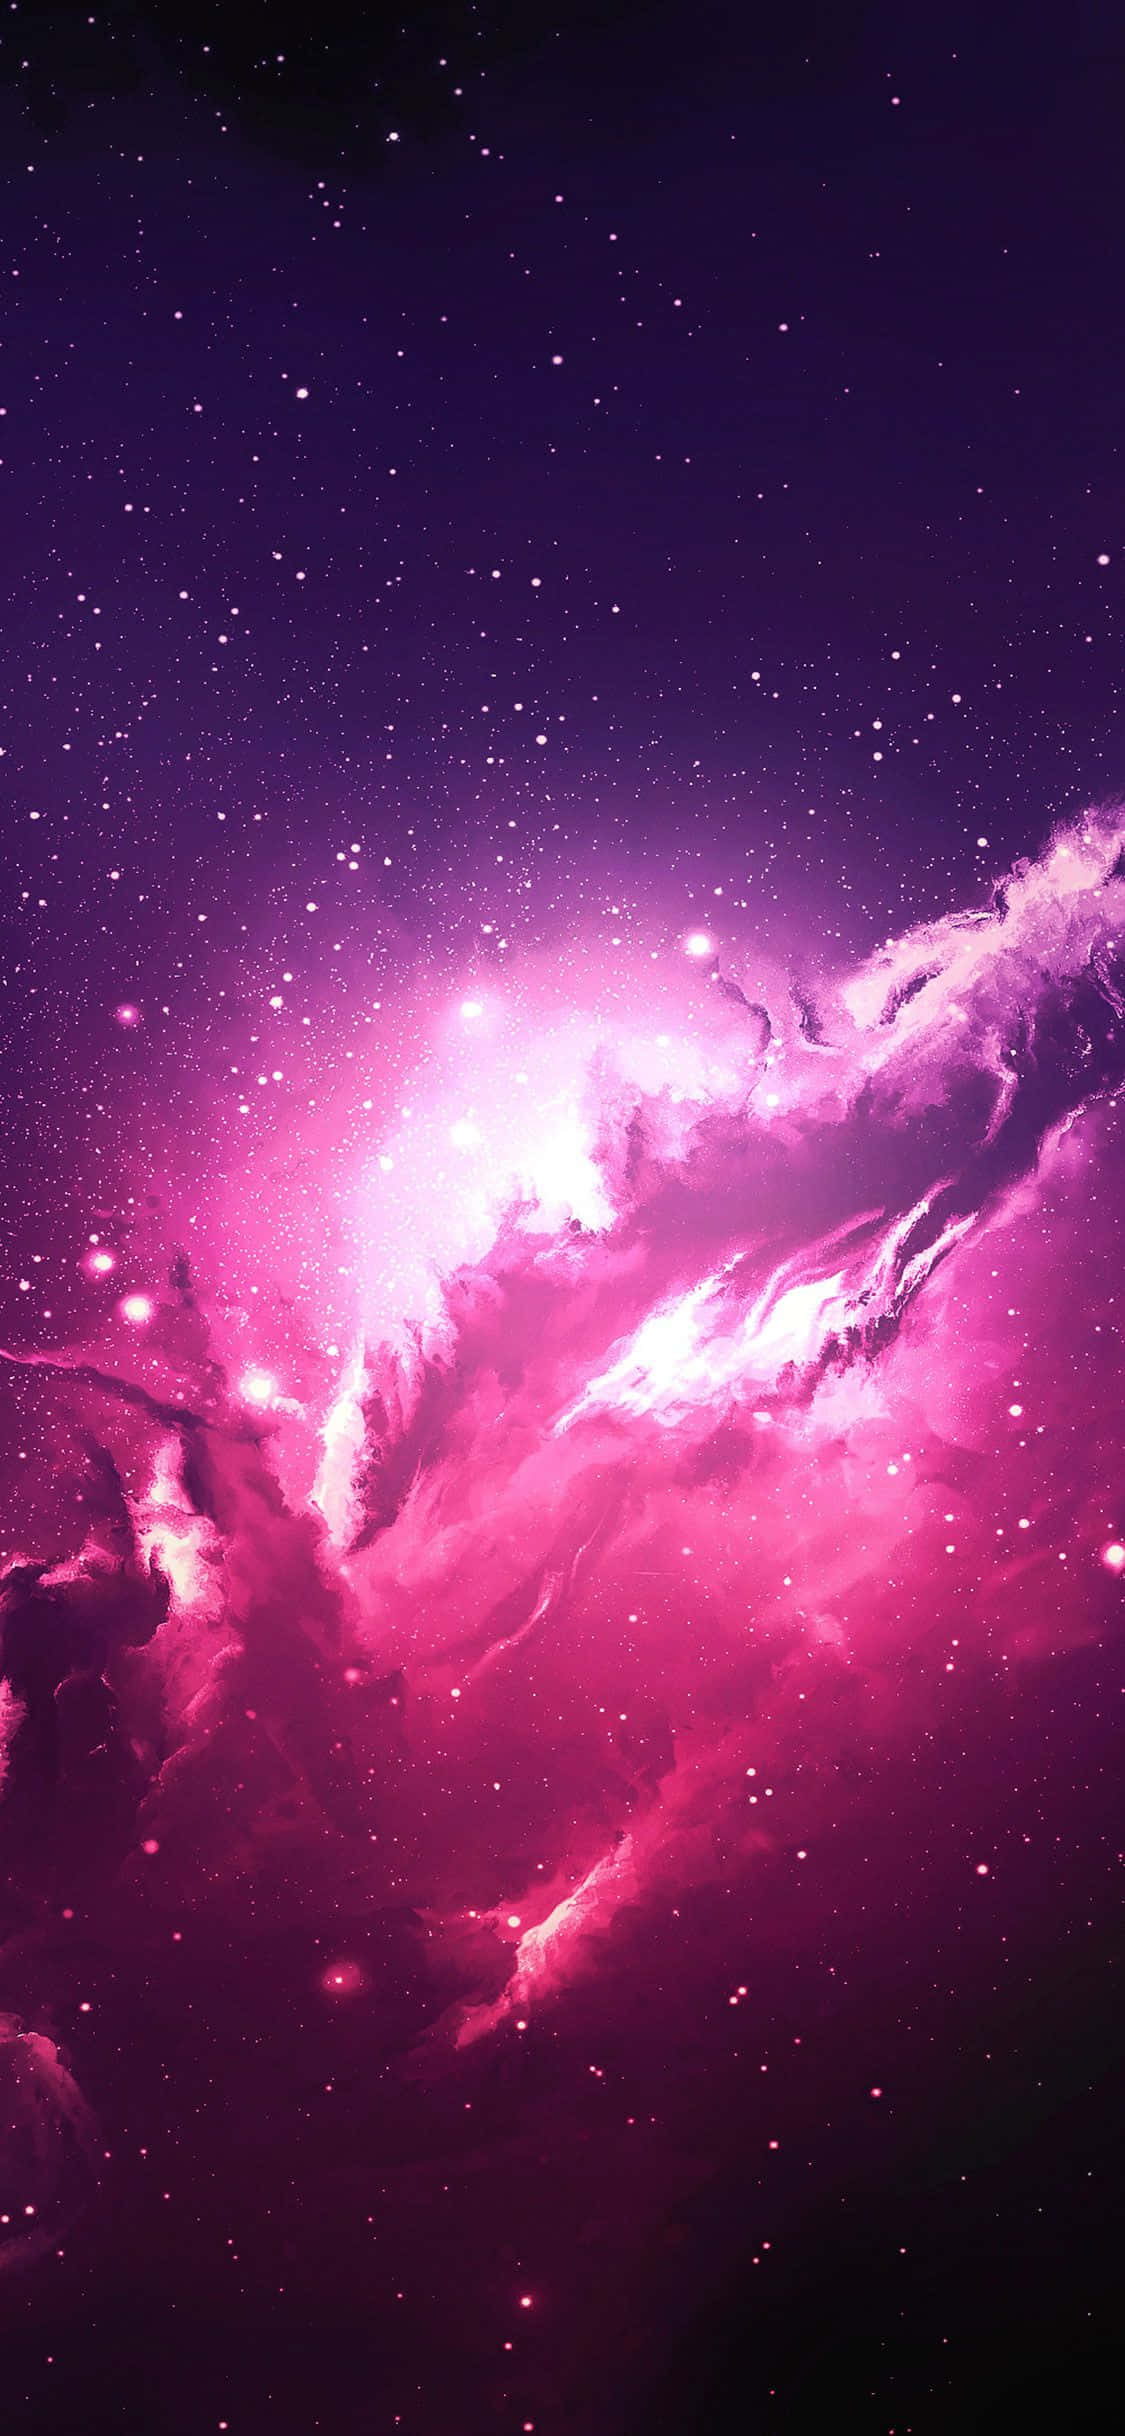 A Purple Space With Stars And Clouds